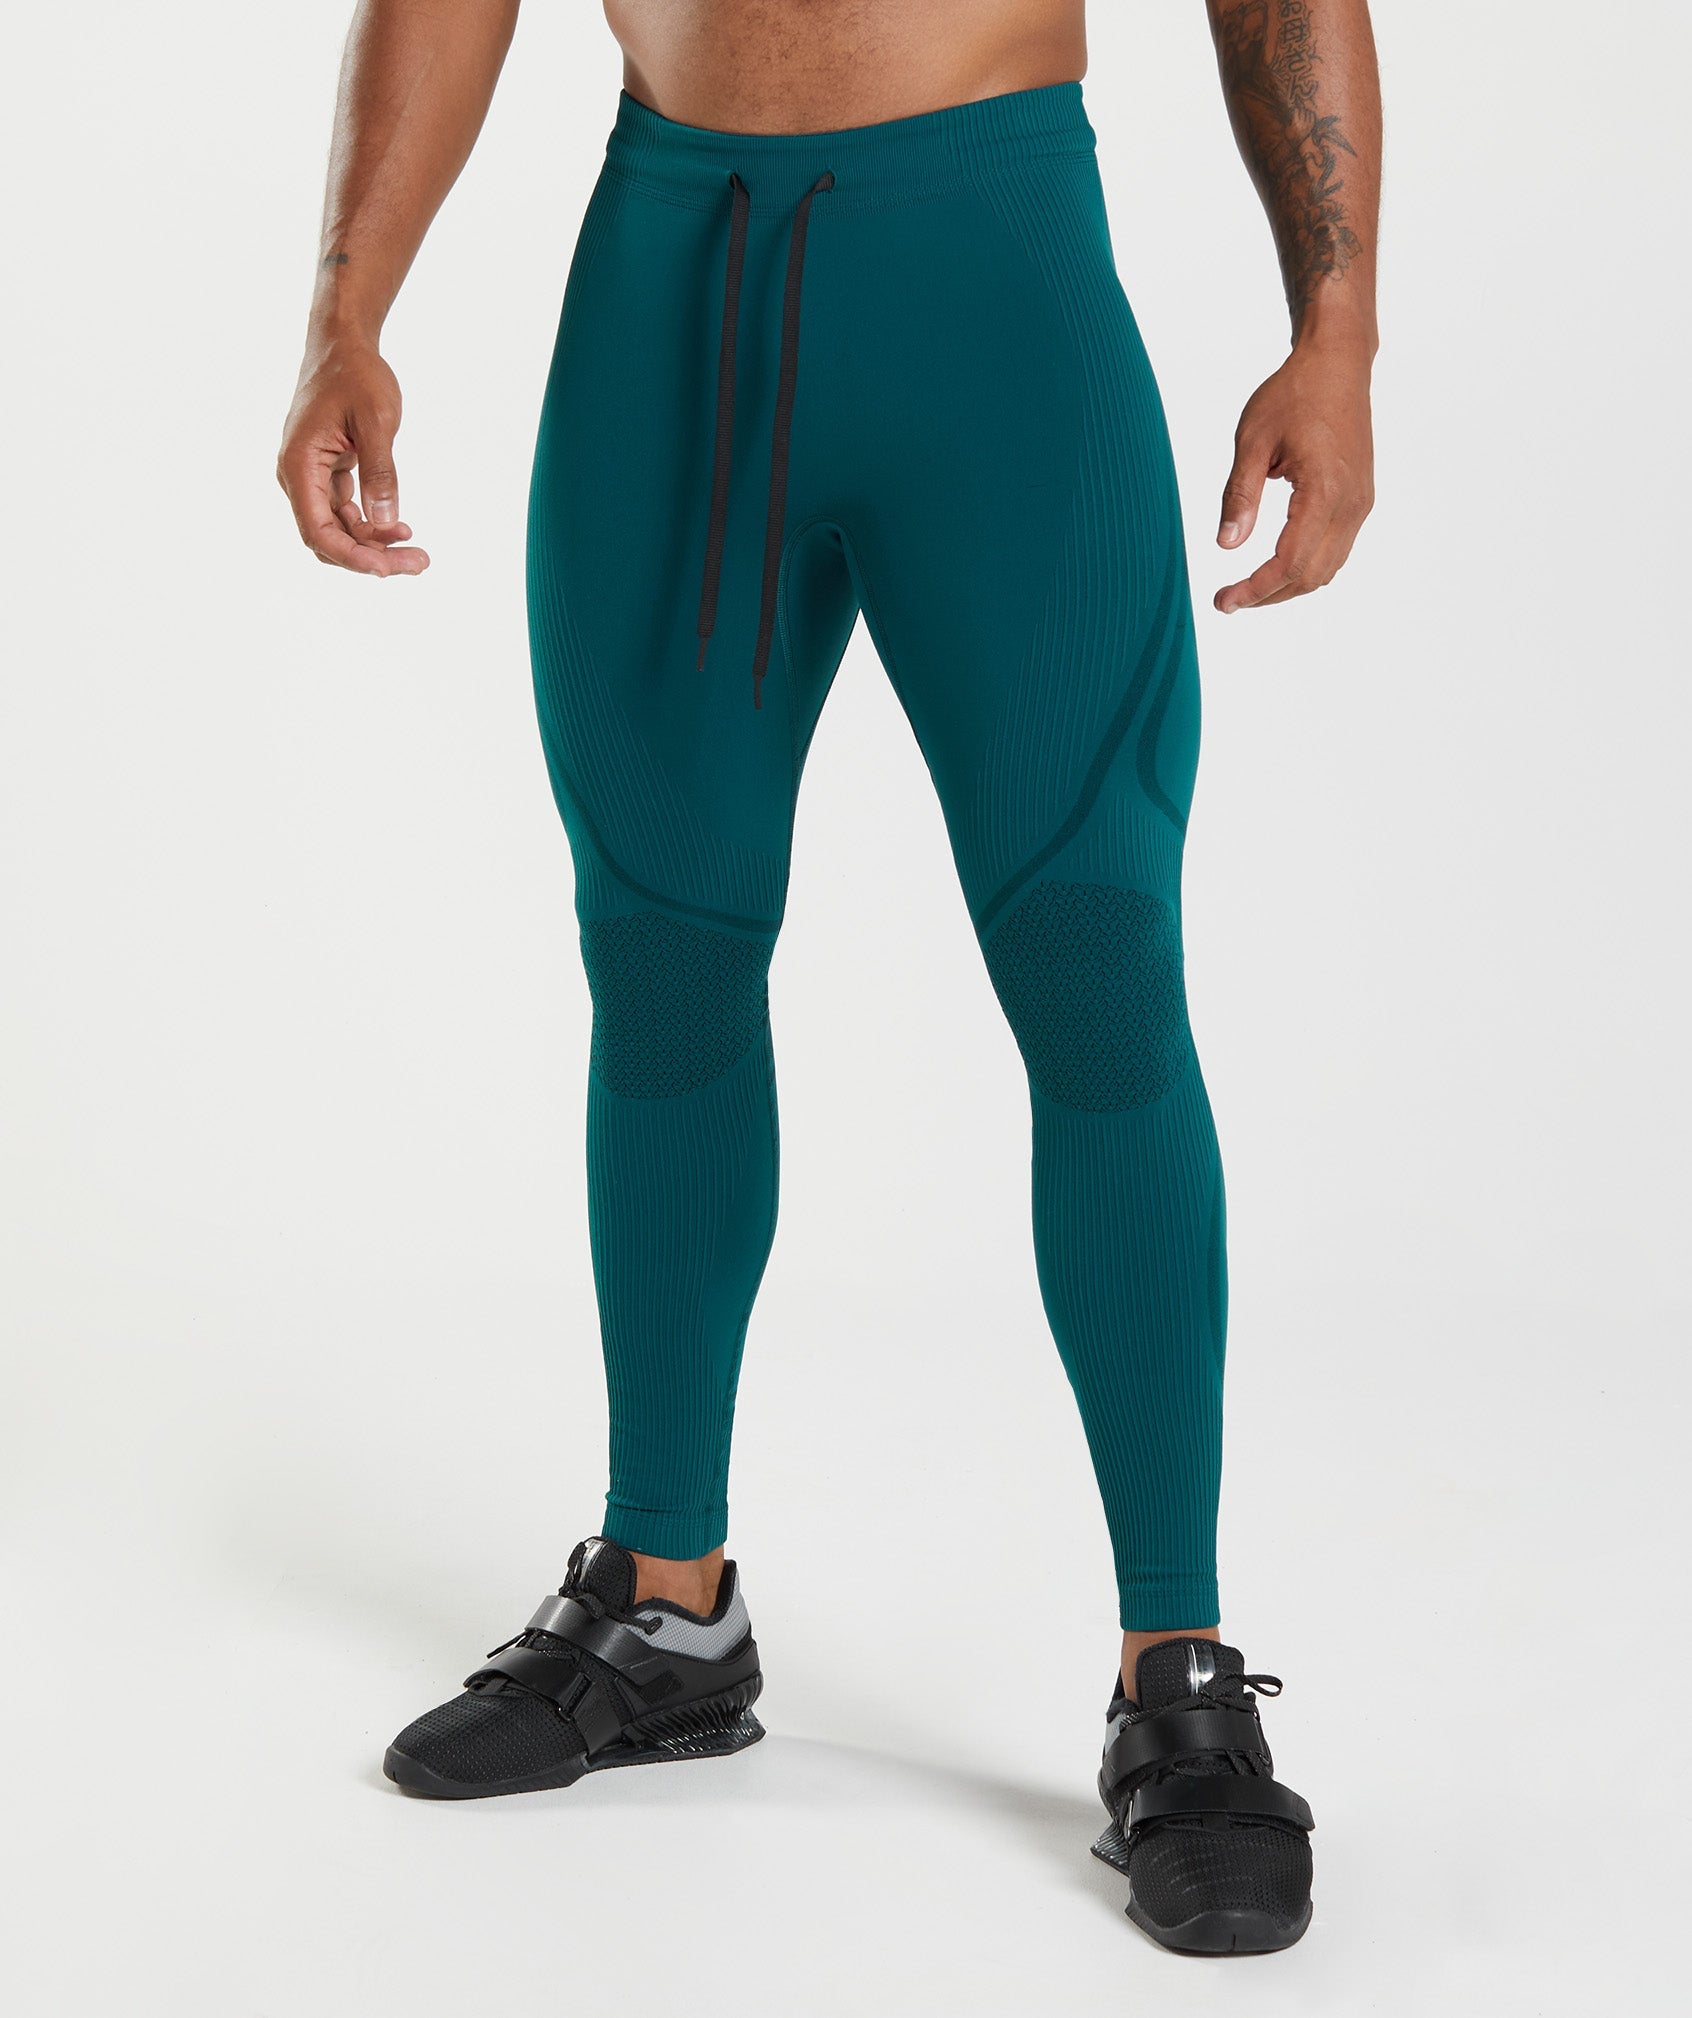 Real Men D Pouch Compression Pants - Ultimate Comfort and Support for  Workouts